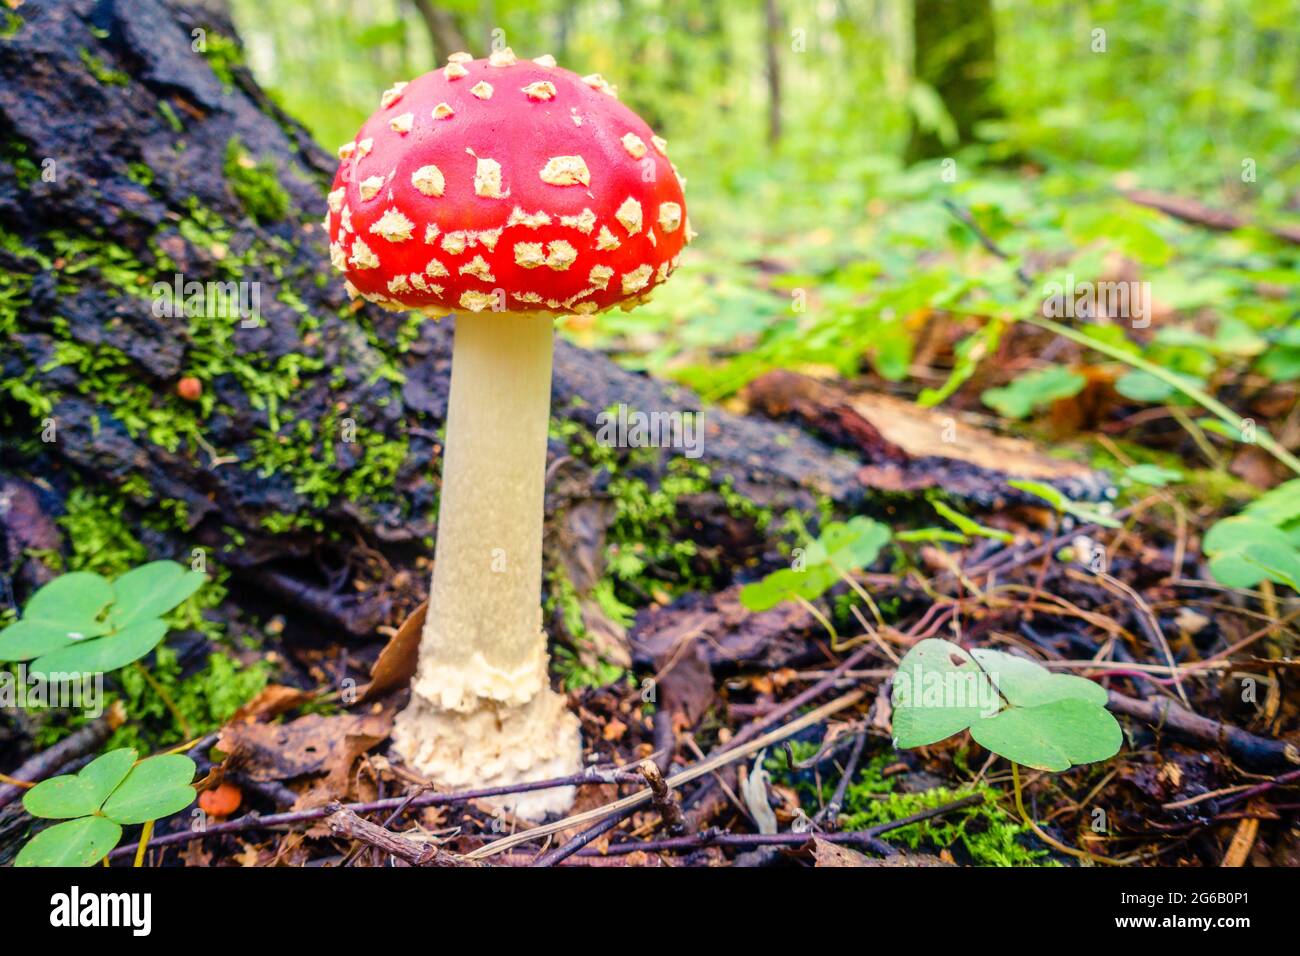 Close-up image of an amanita mushroom in forest in Russia Stock Photo